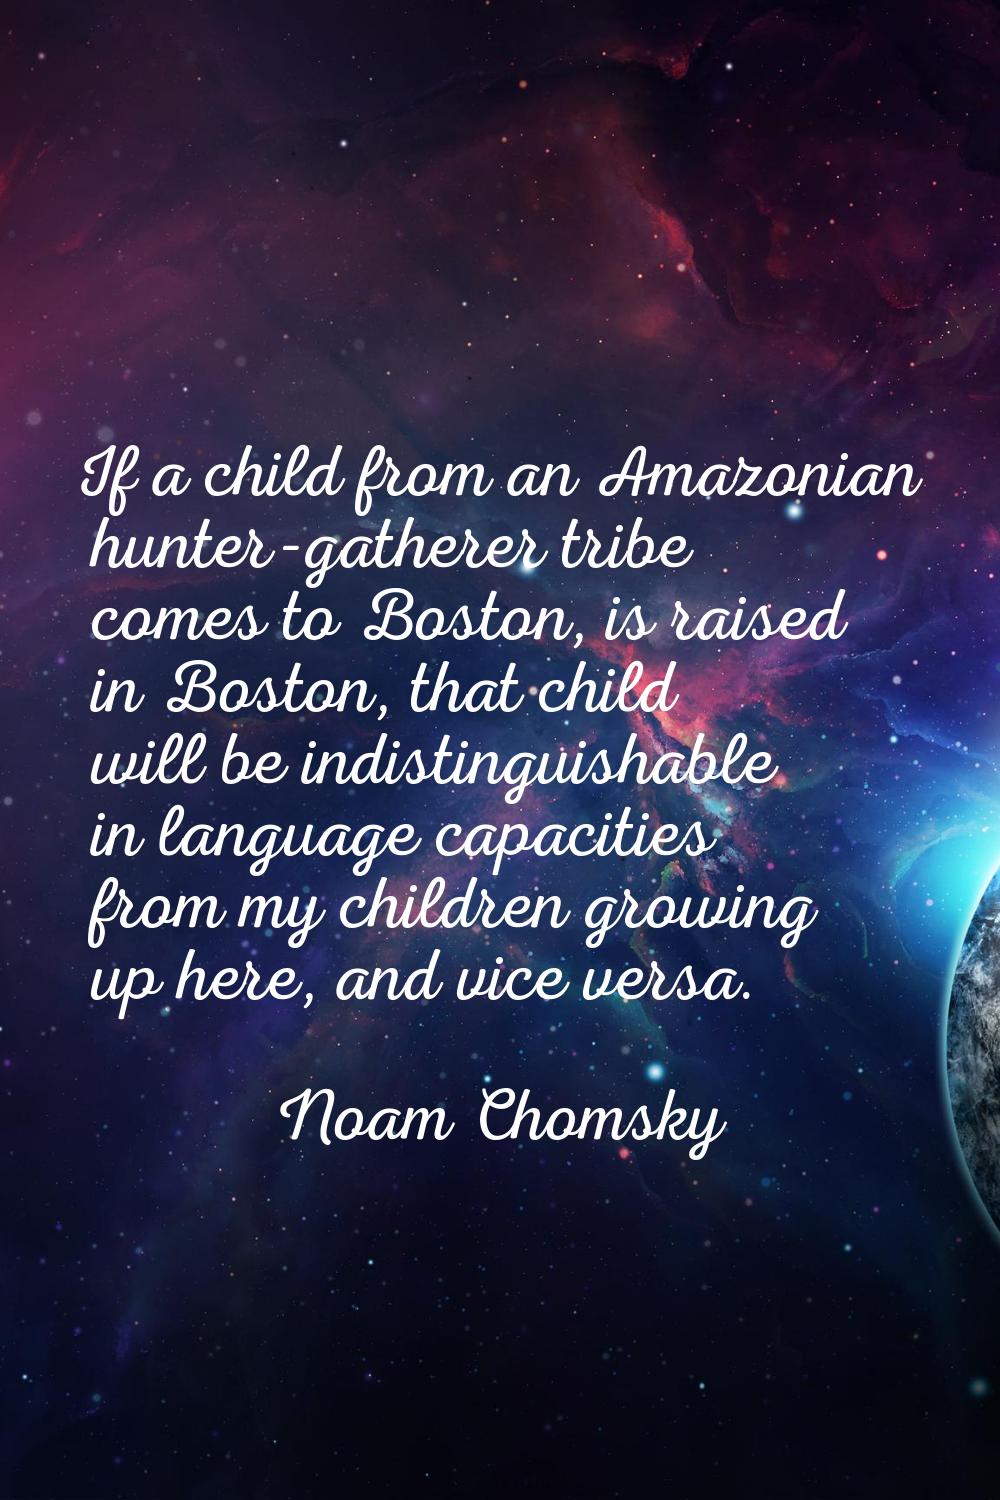 If a child from an Amazonian hunter-gatherer tribe comes to Boston, is raised in Boston, that child